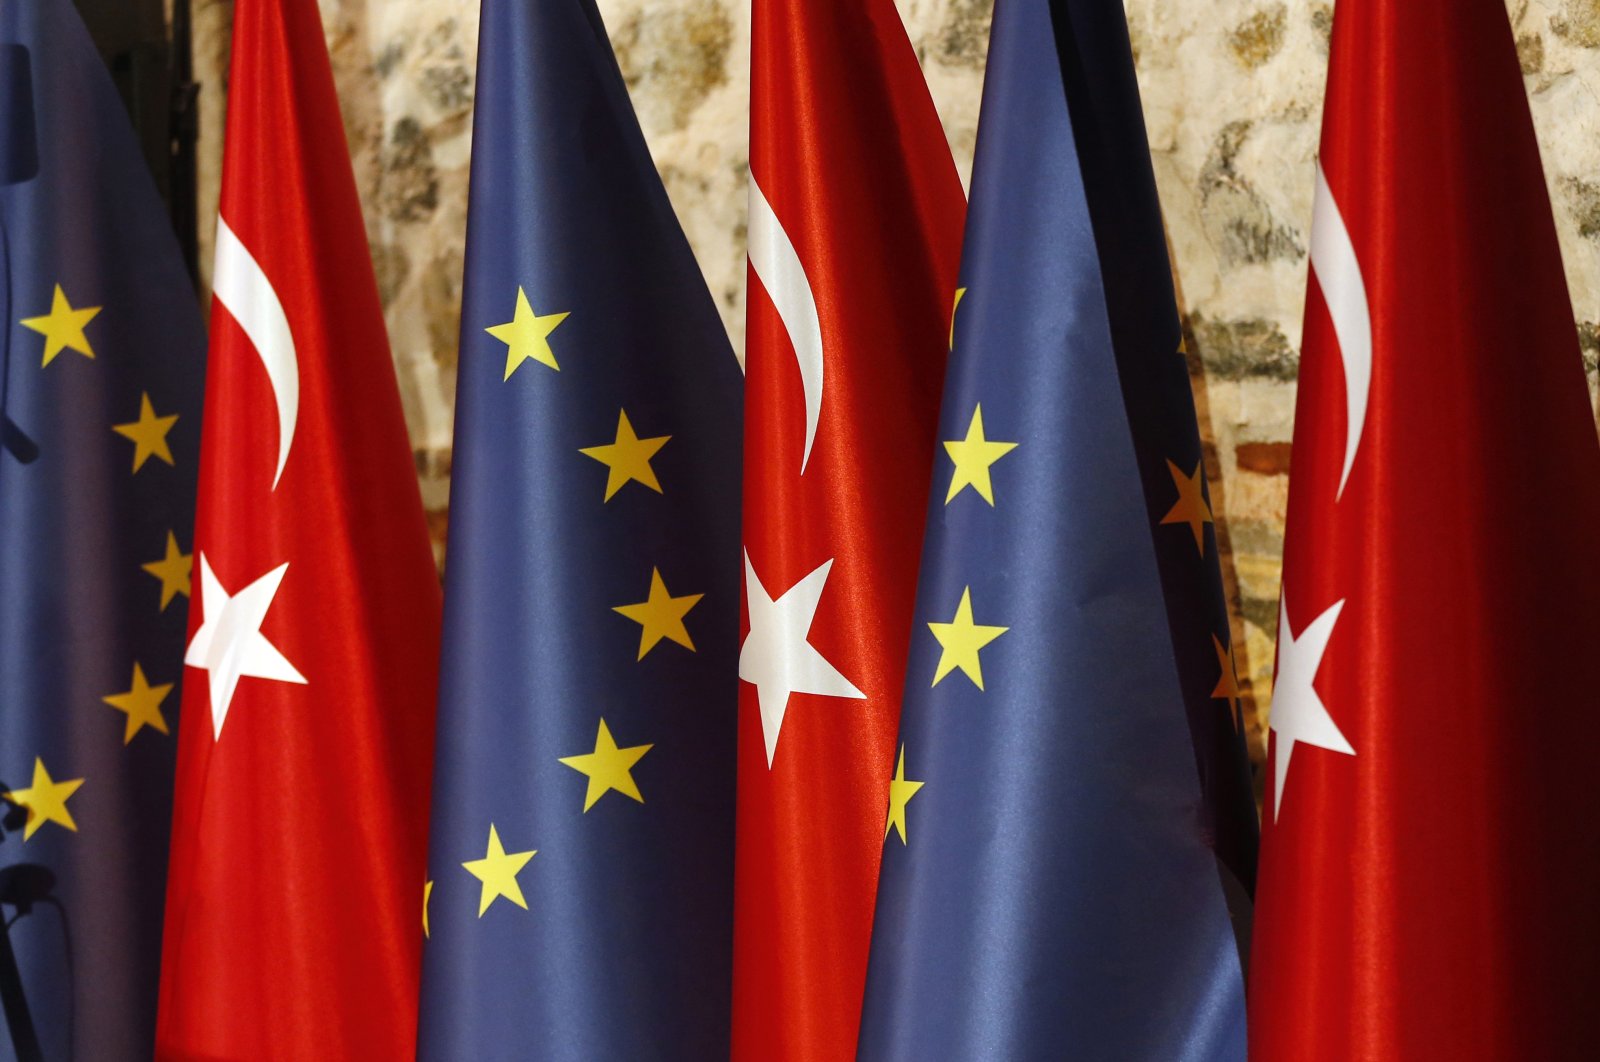 Türkiye and European Union flags prior to the opening session of a high-level meeting between EU and Türkiye, in Istanbul, Thursday, Feb. 28, 2019. (AP File Photo)